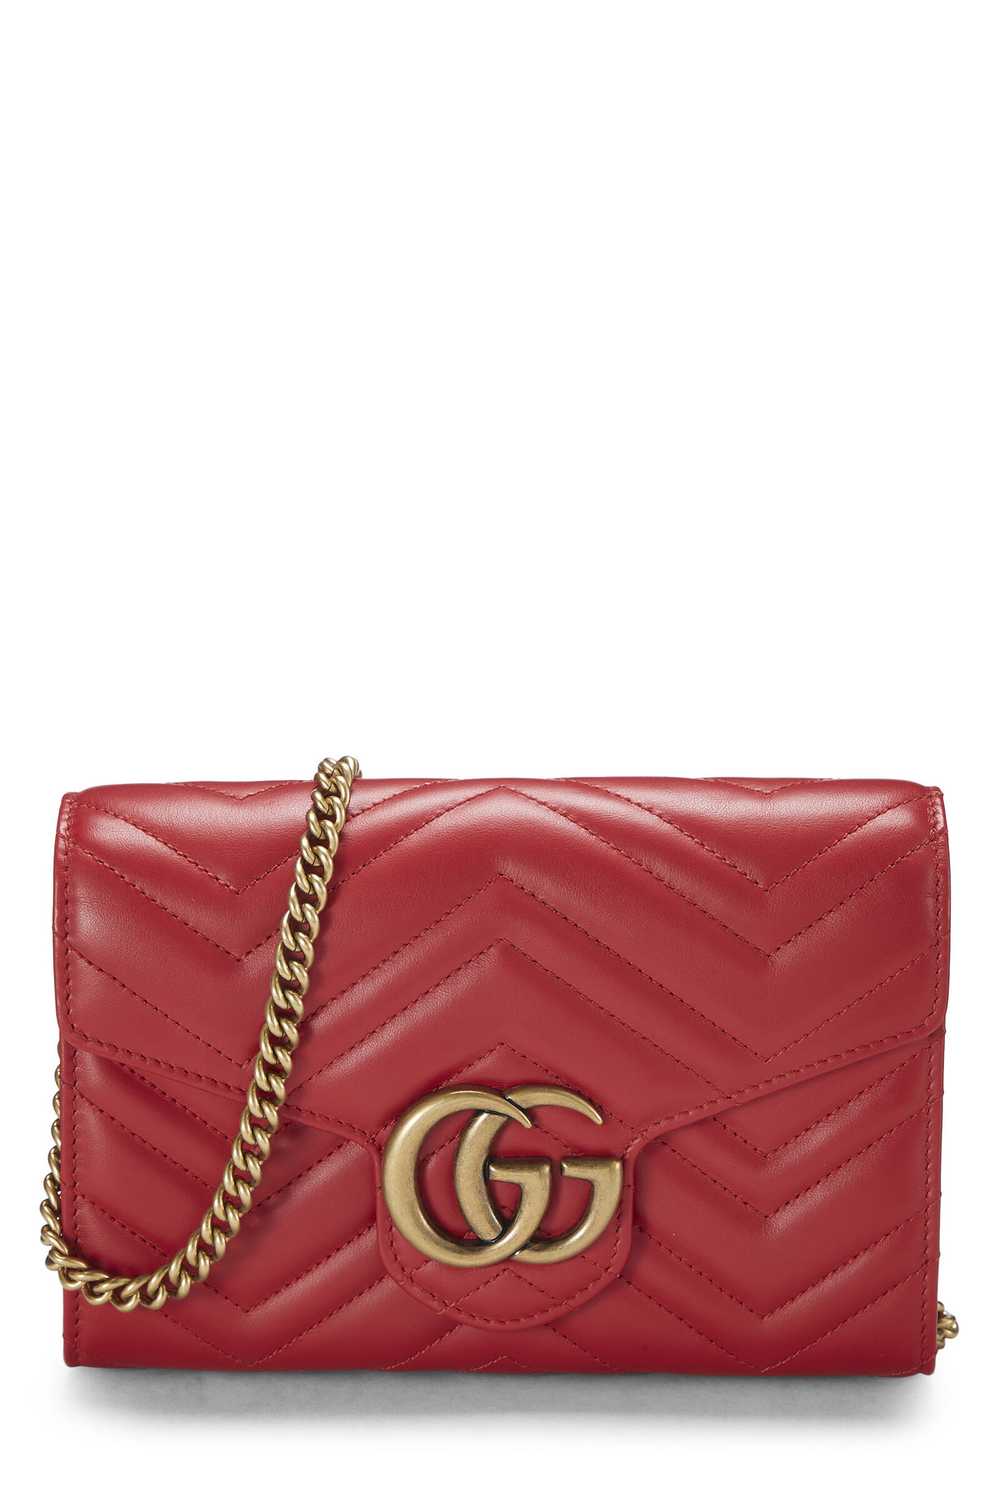 Red Leather GG Marmont Crossbody Small - image 1